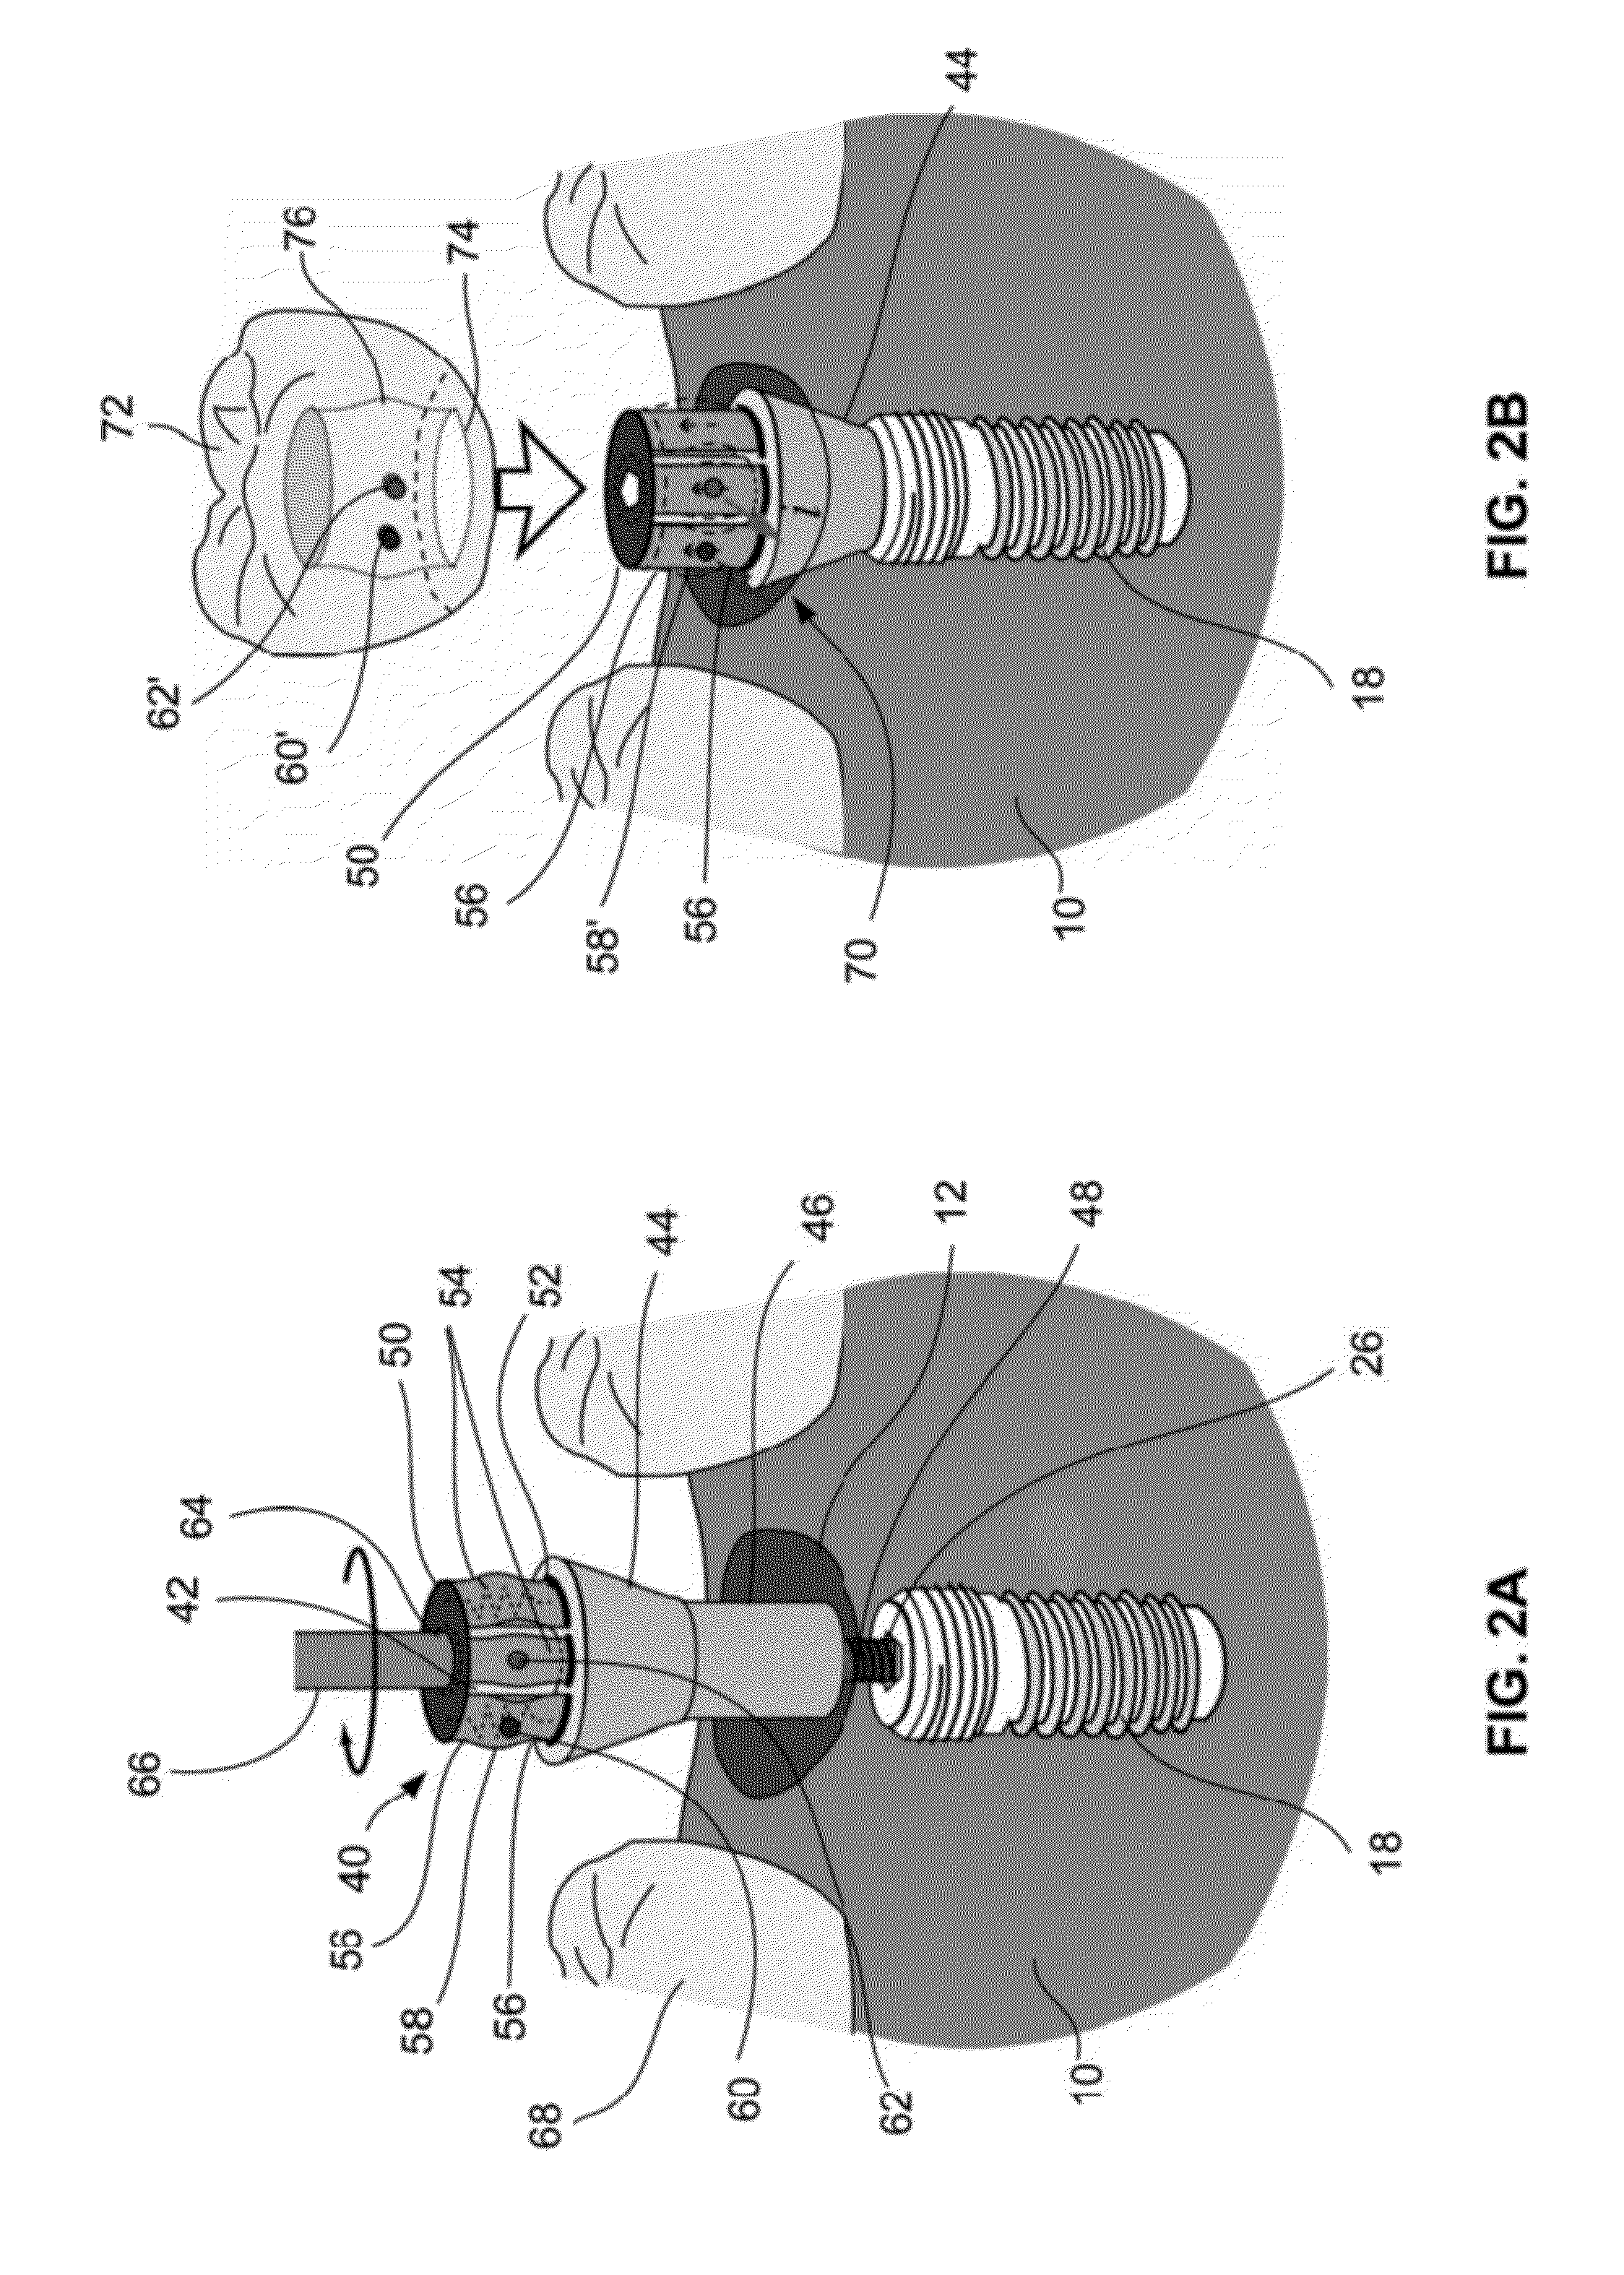 Abutment devices and methods for natural teeth